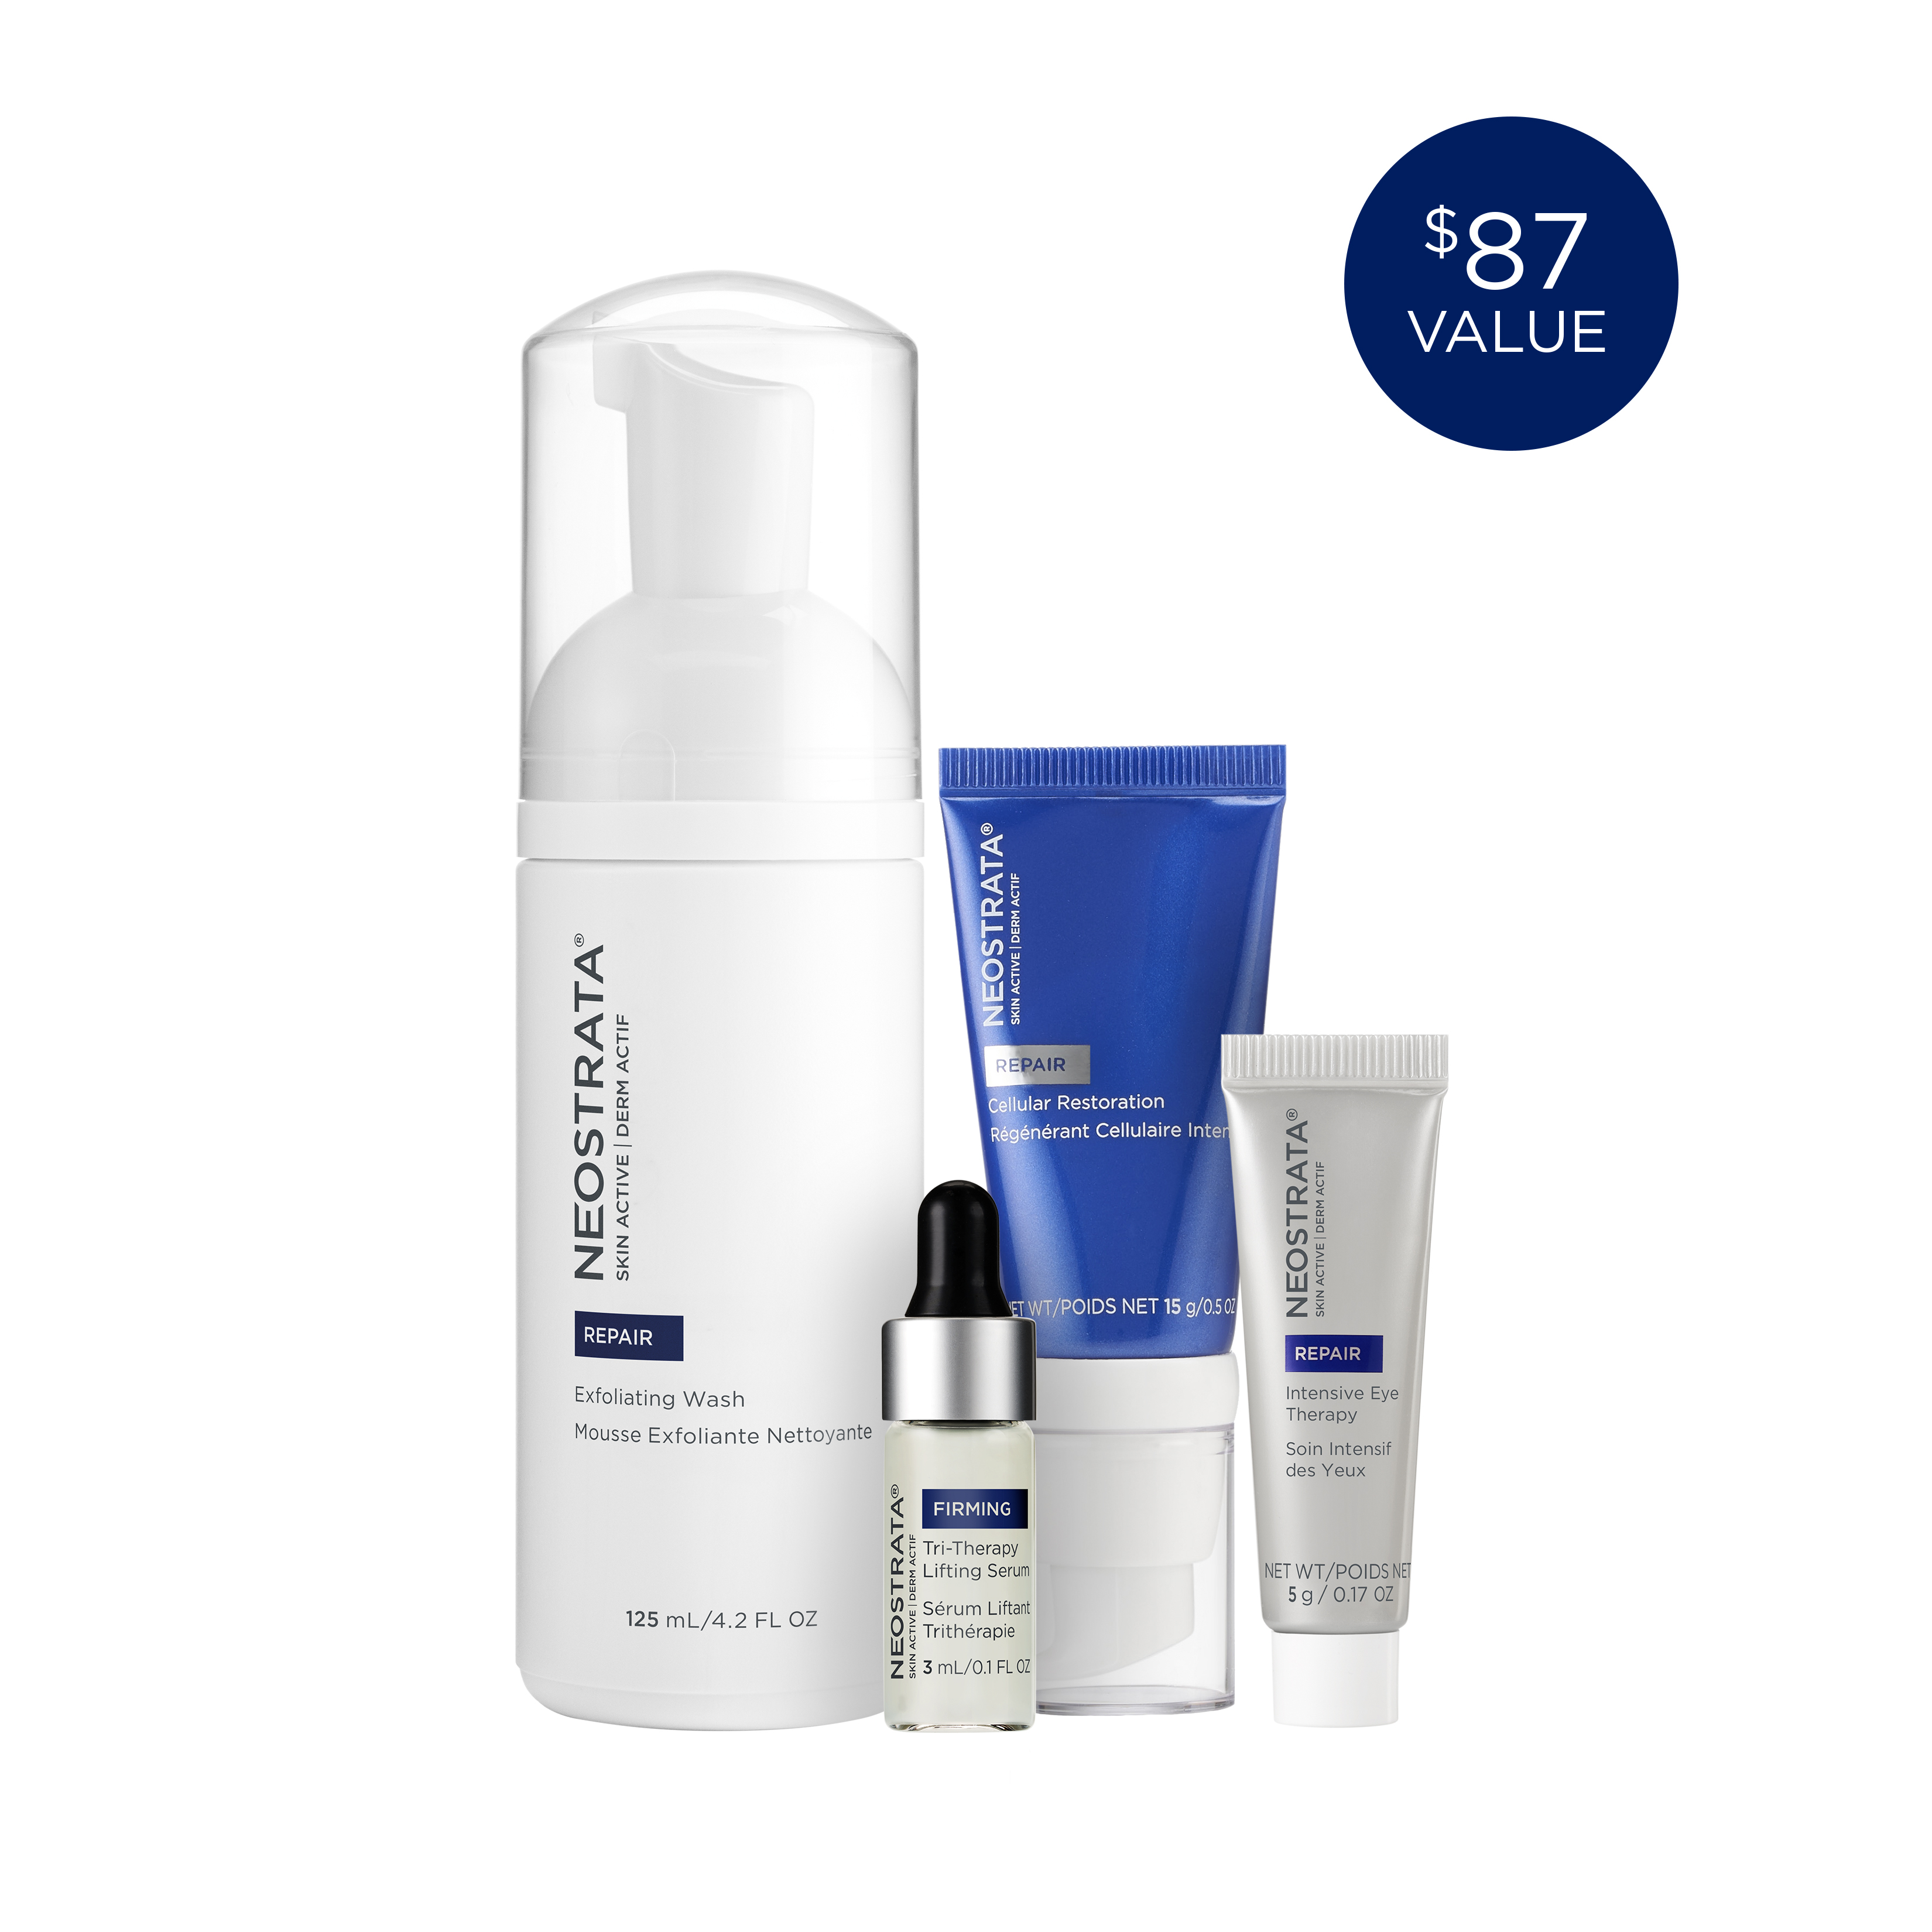 Antiaging Favorites Sampler Set | New To Neostrata & Not Sure Where To Start? Start Here | Anti-Aging